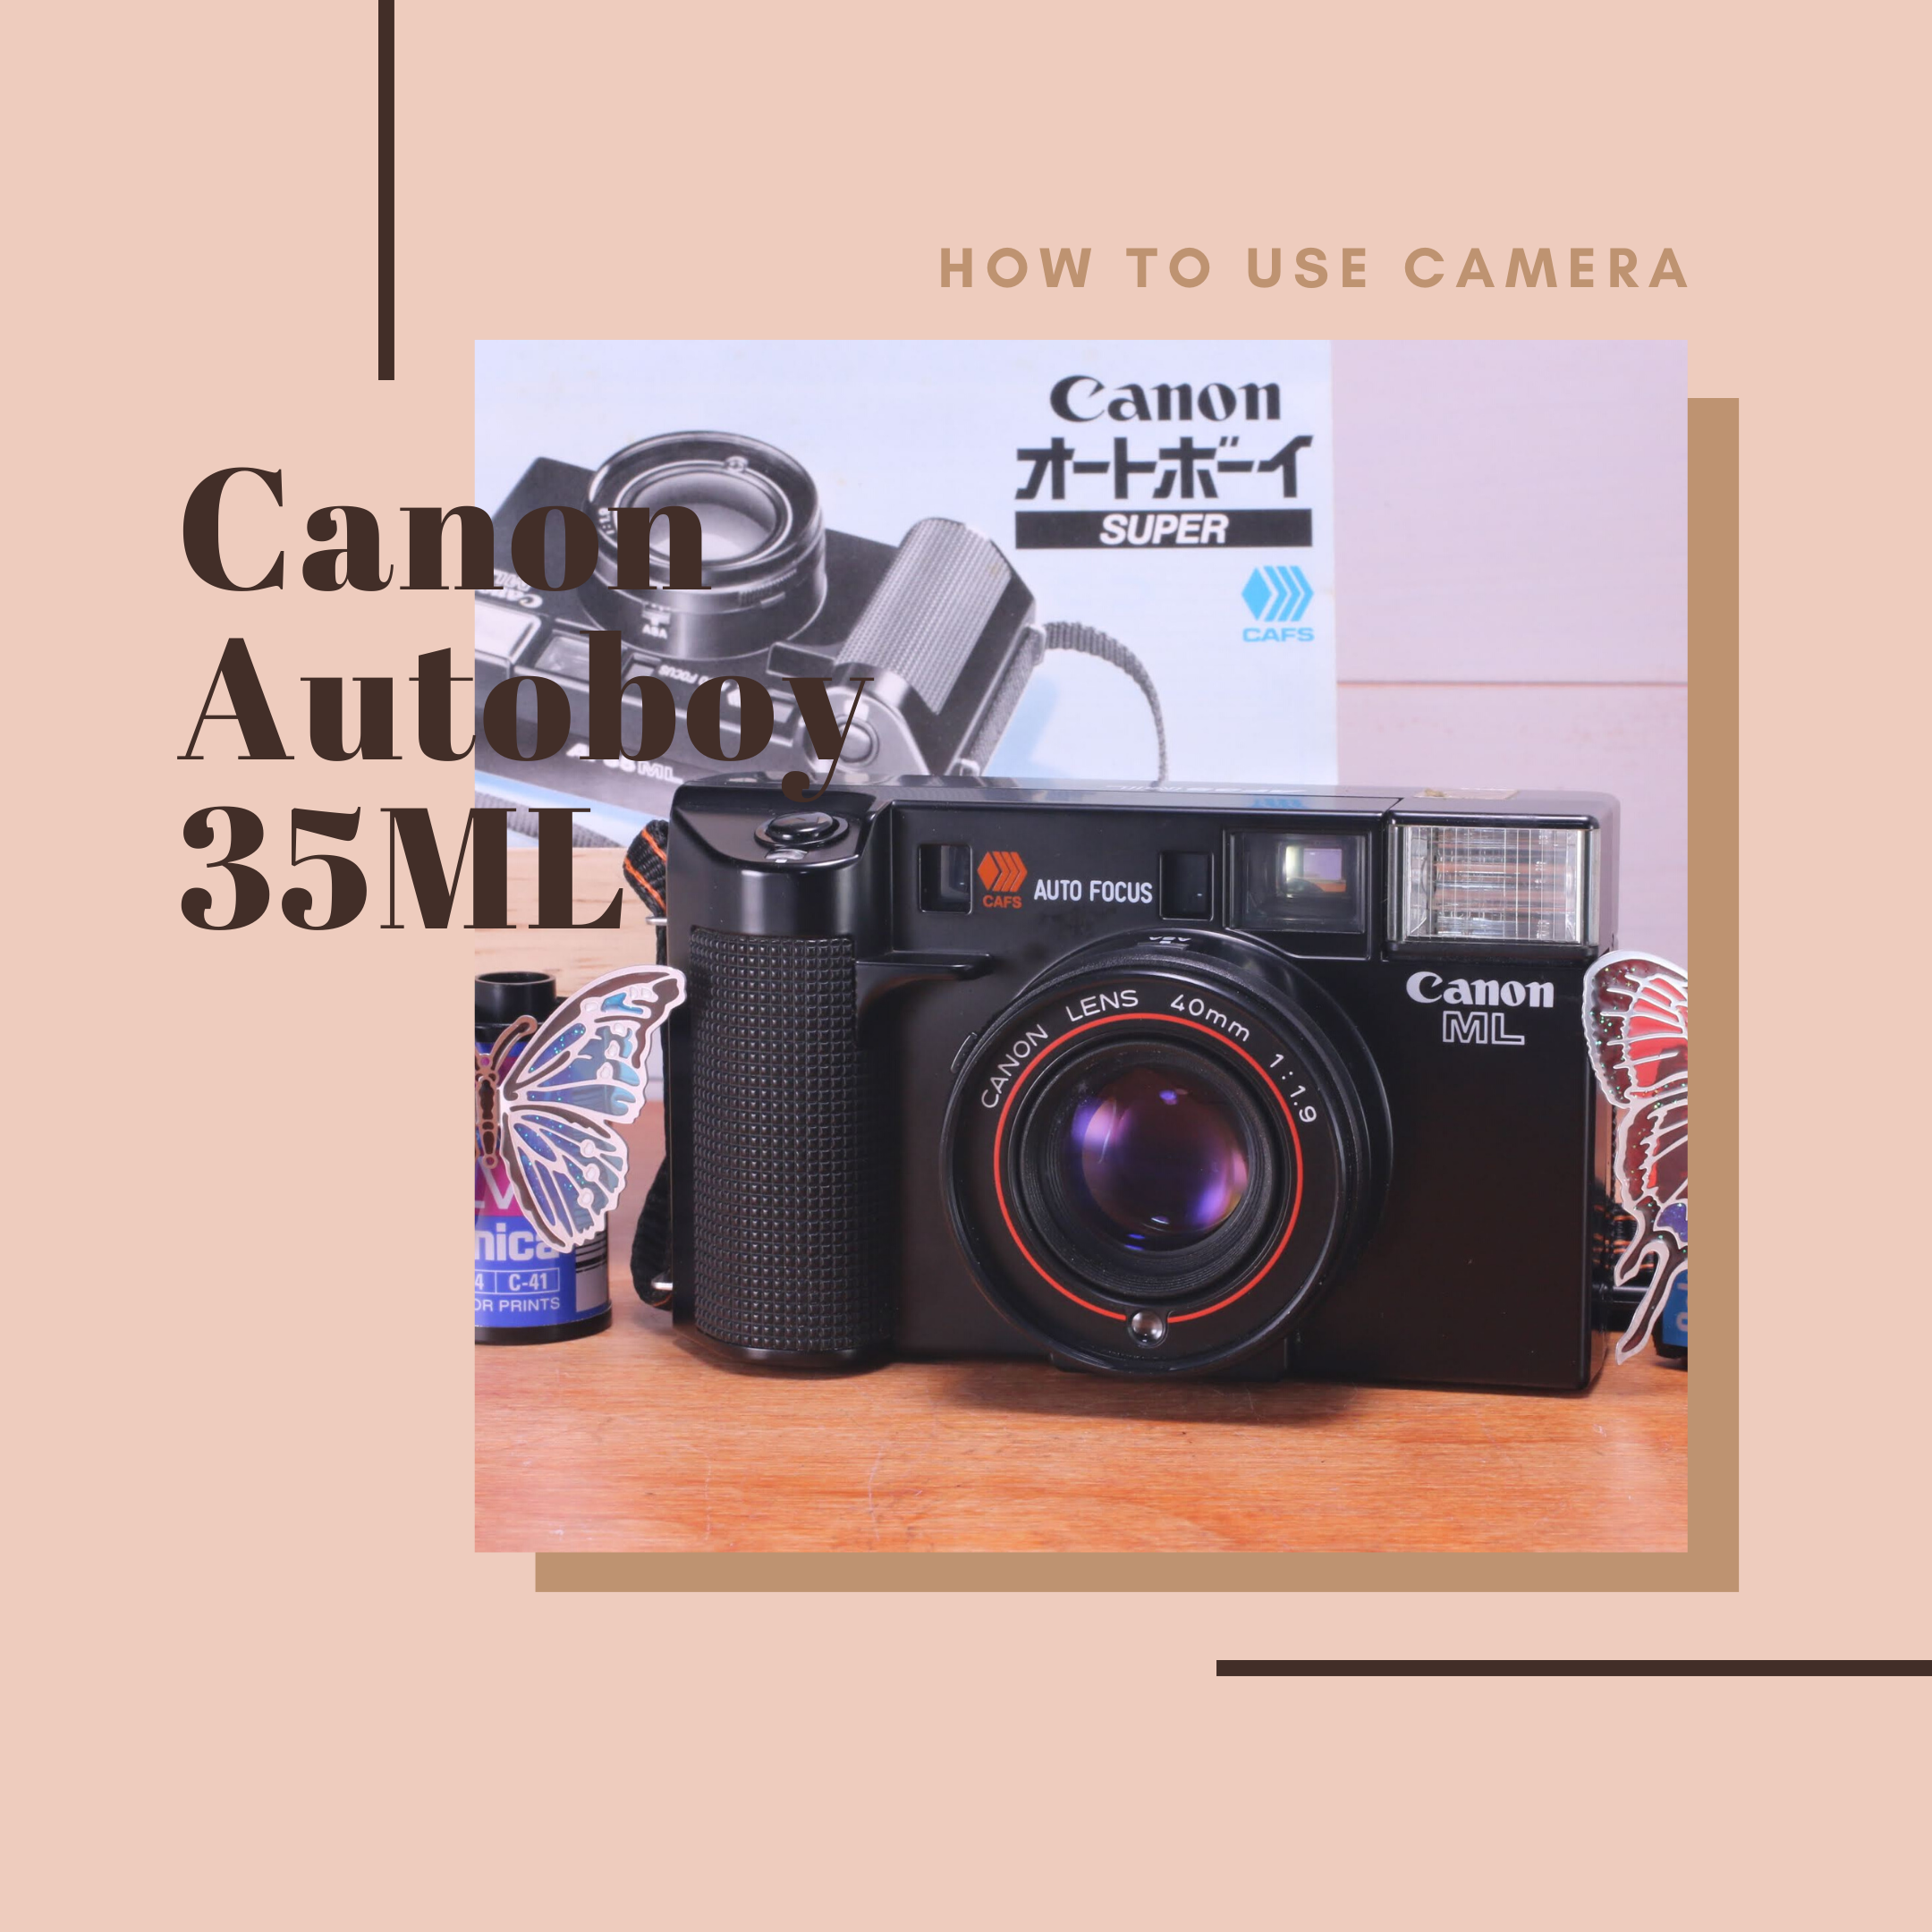 Canon AF 35ML の使い方 | Totte Me Camera